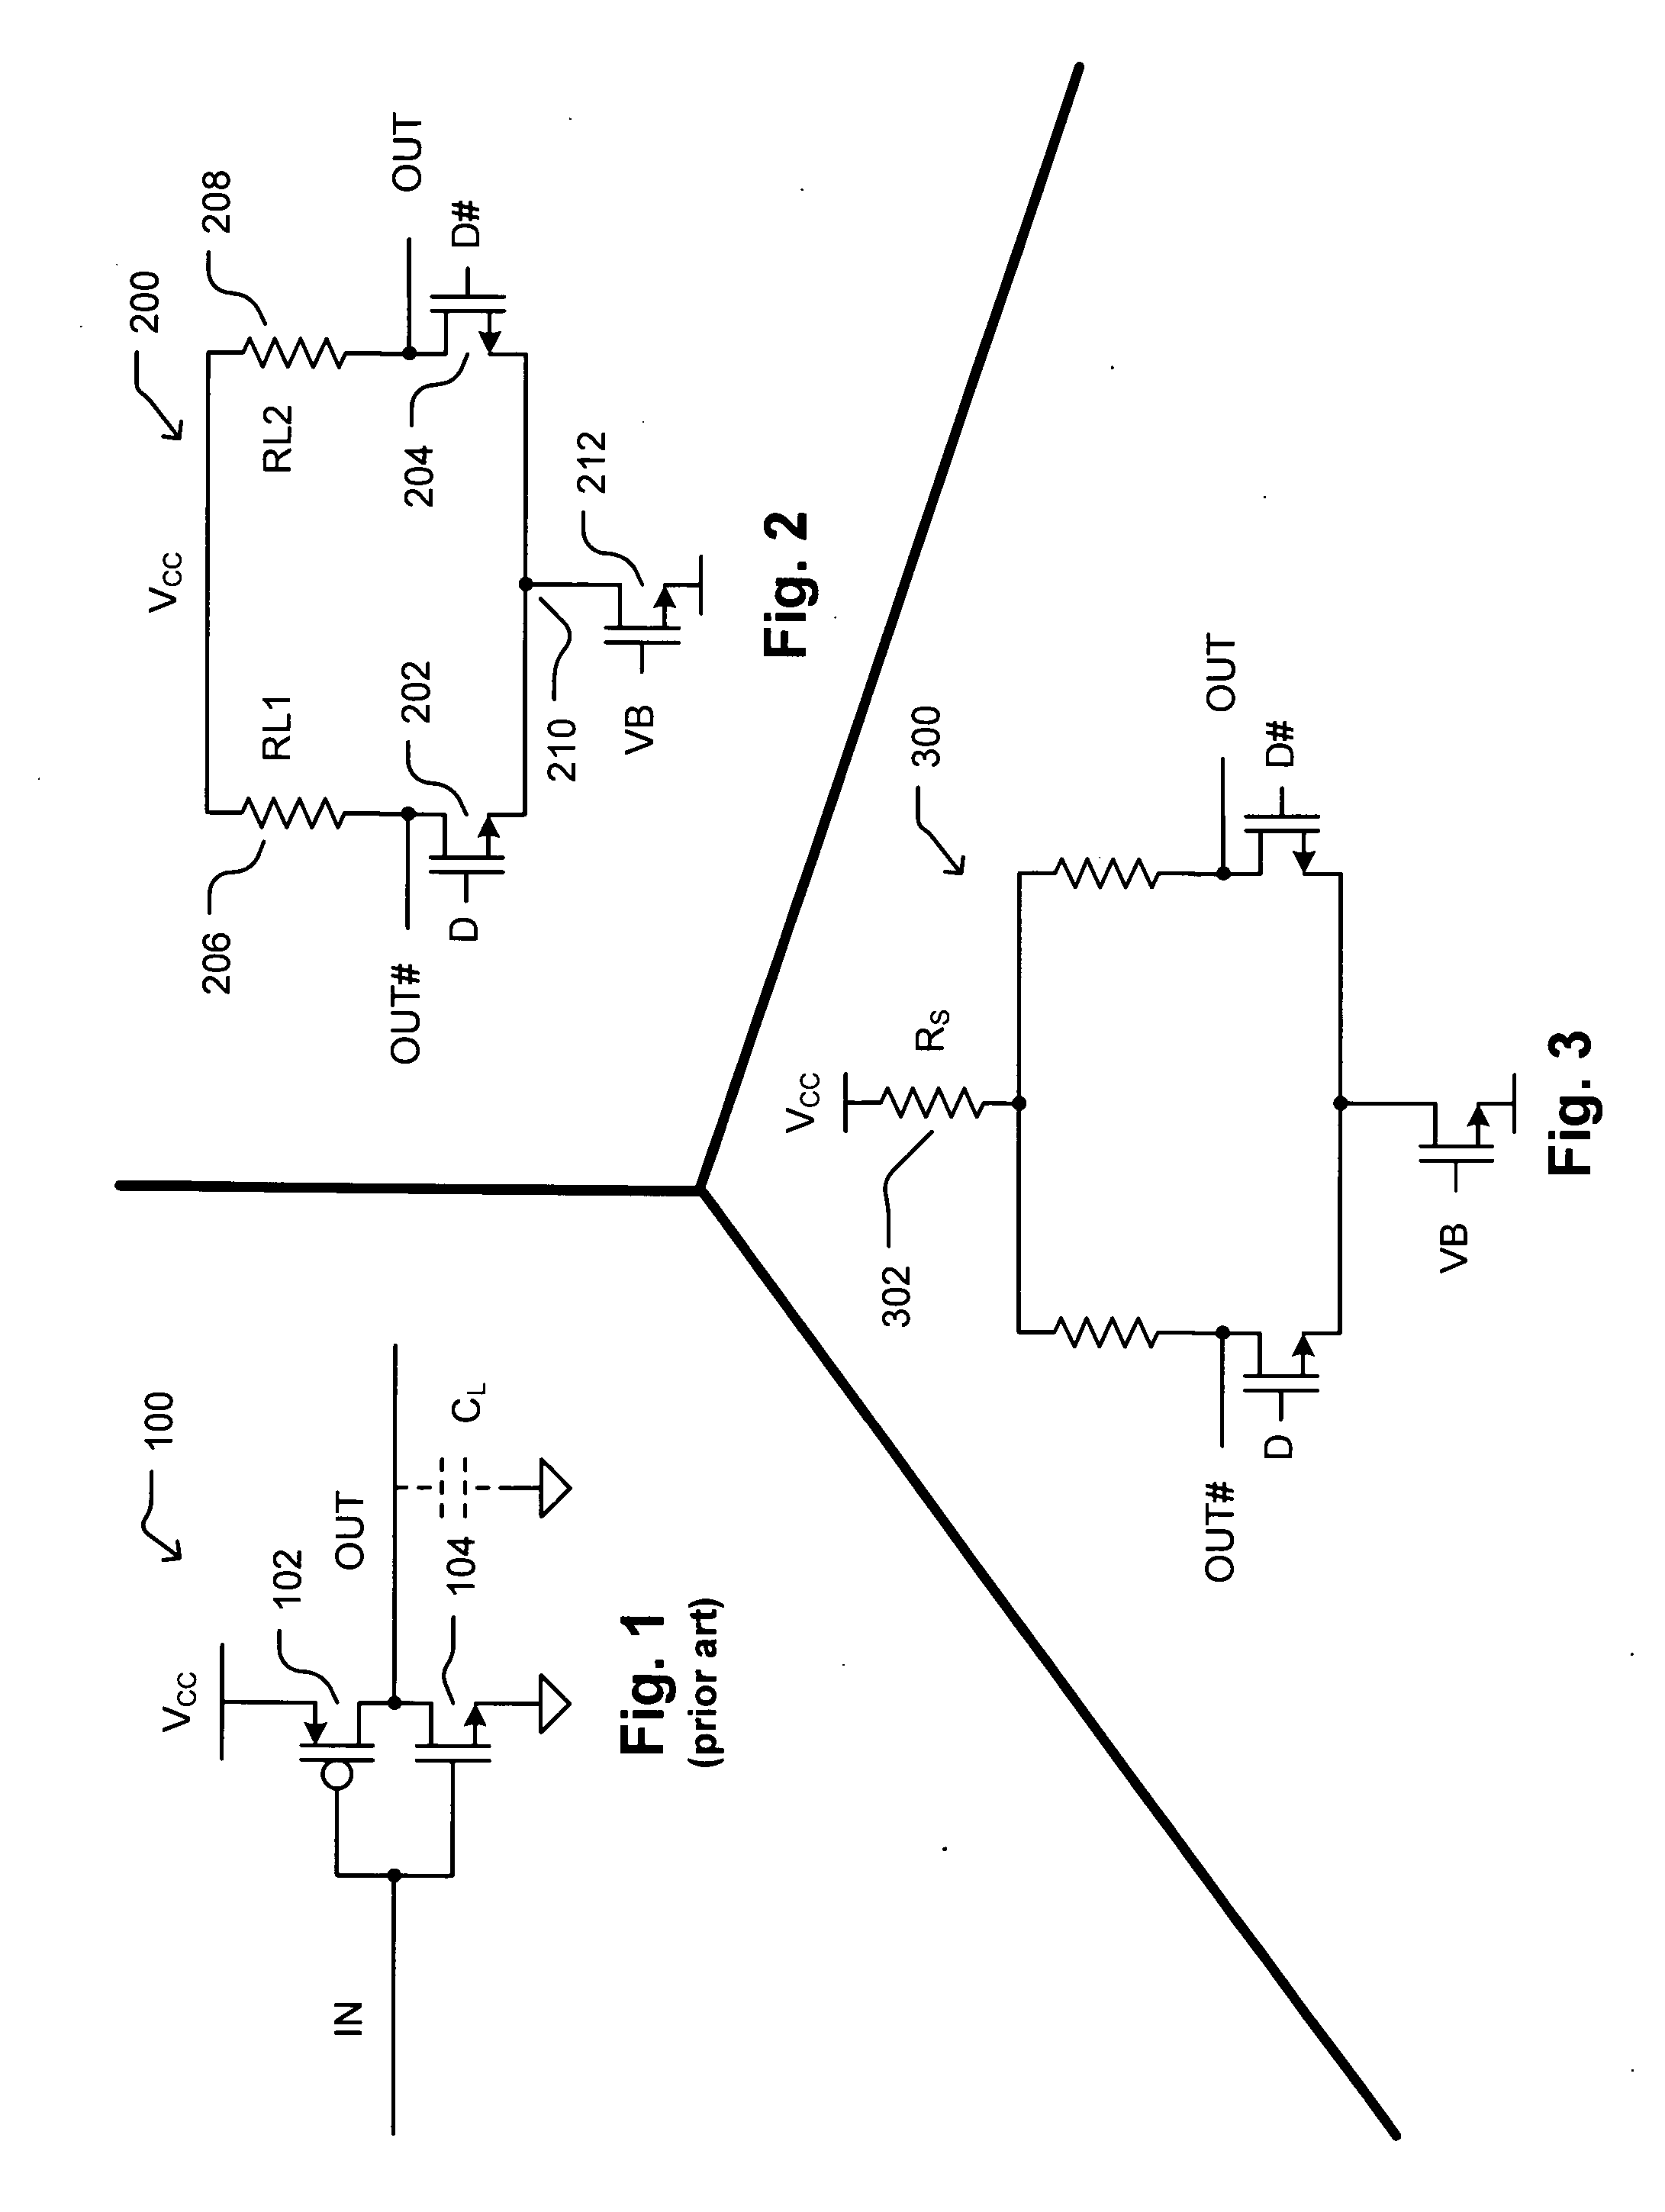 Current-controlled CMOS logic family